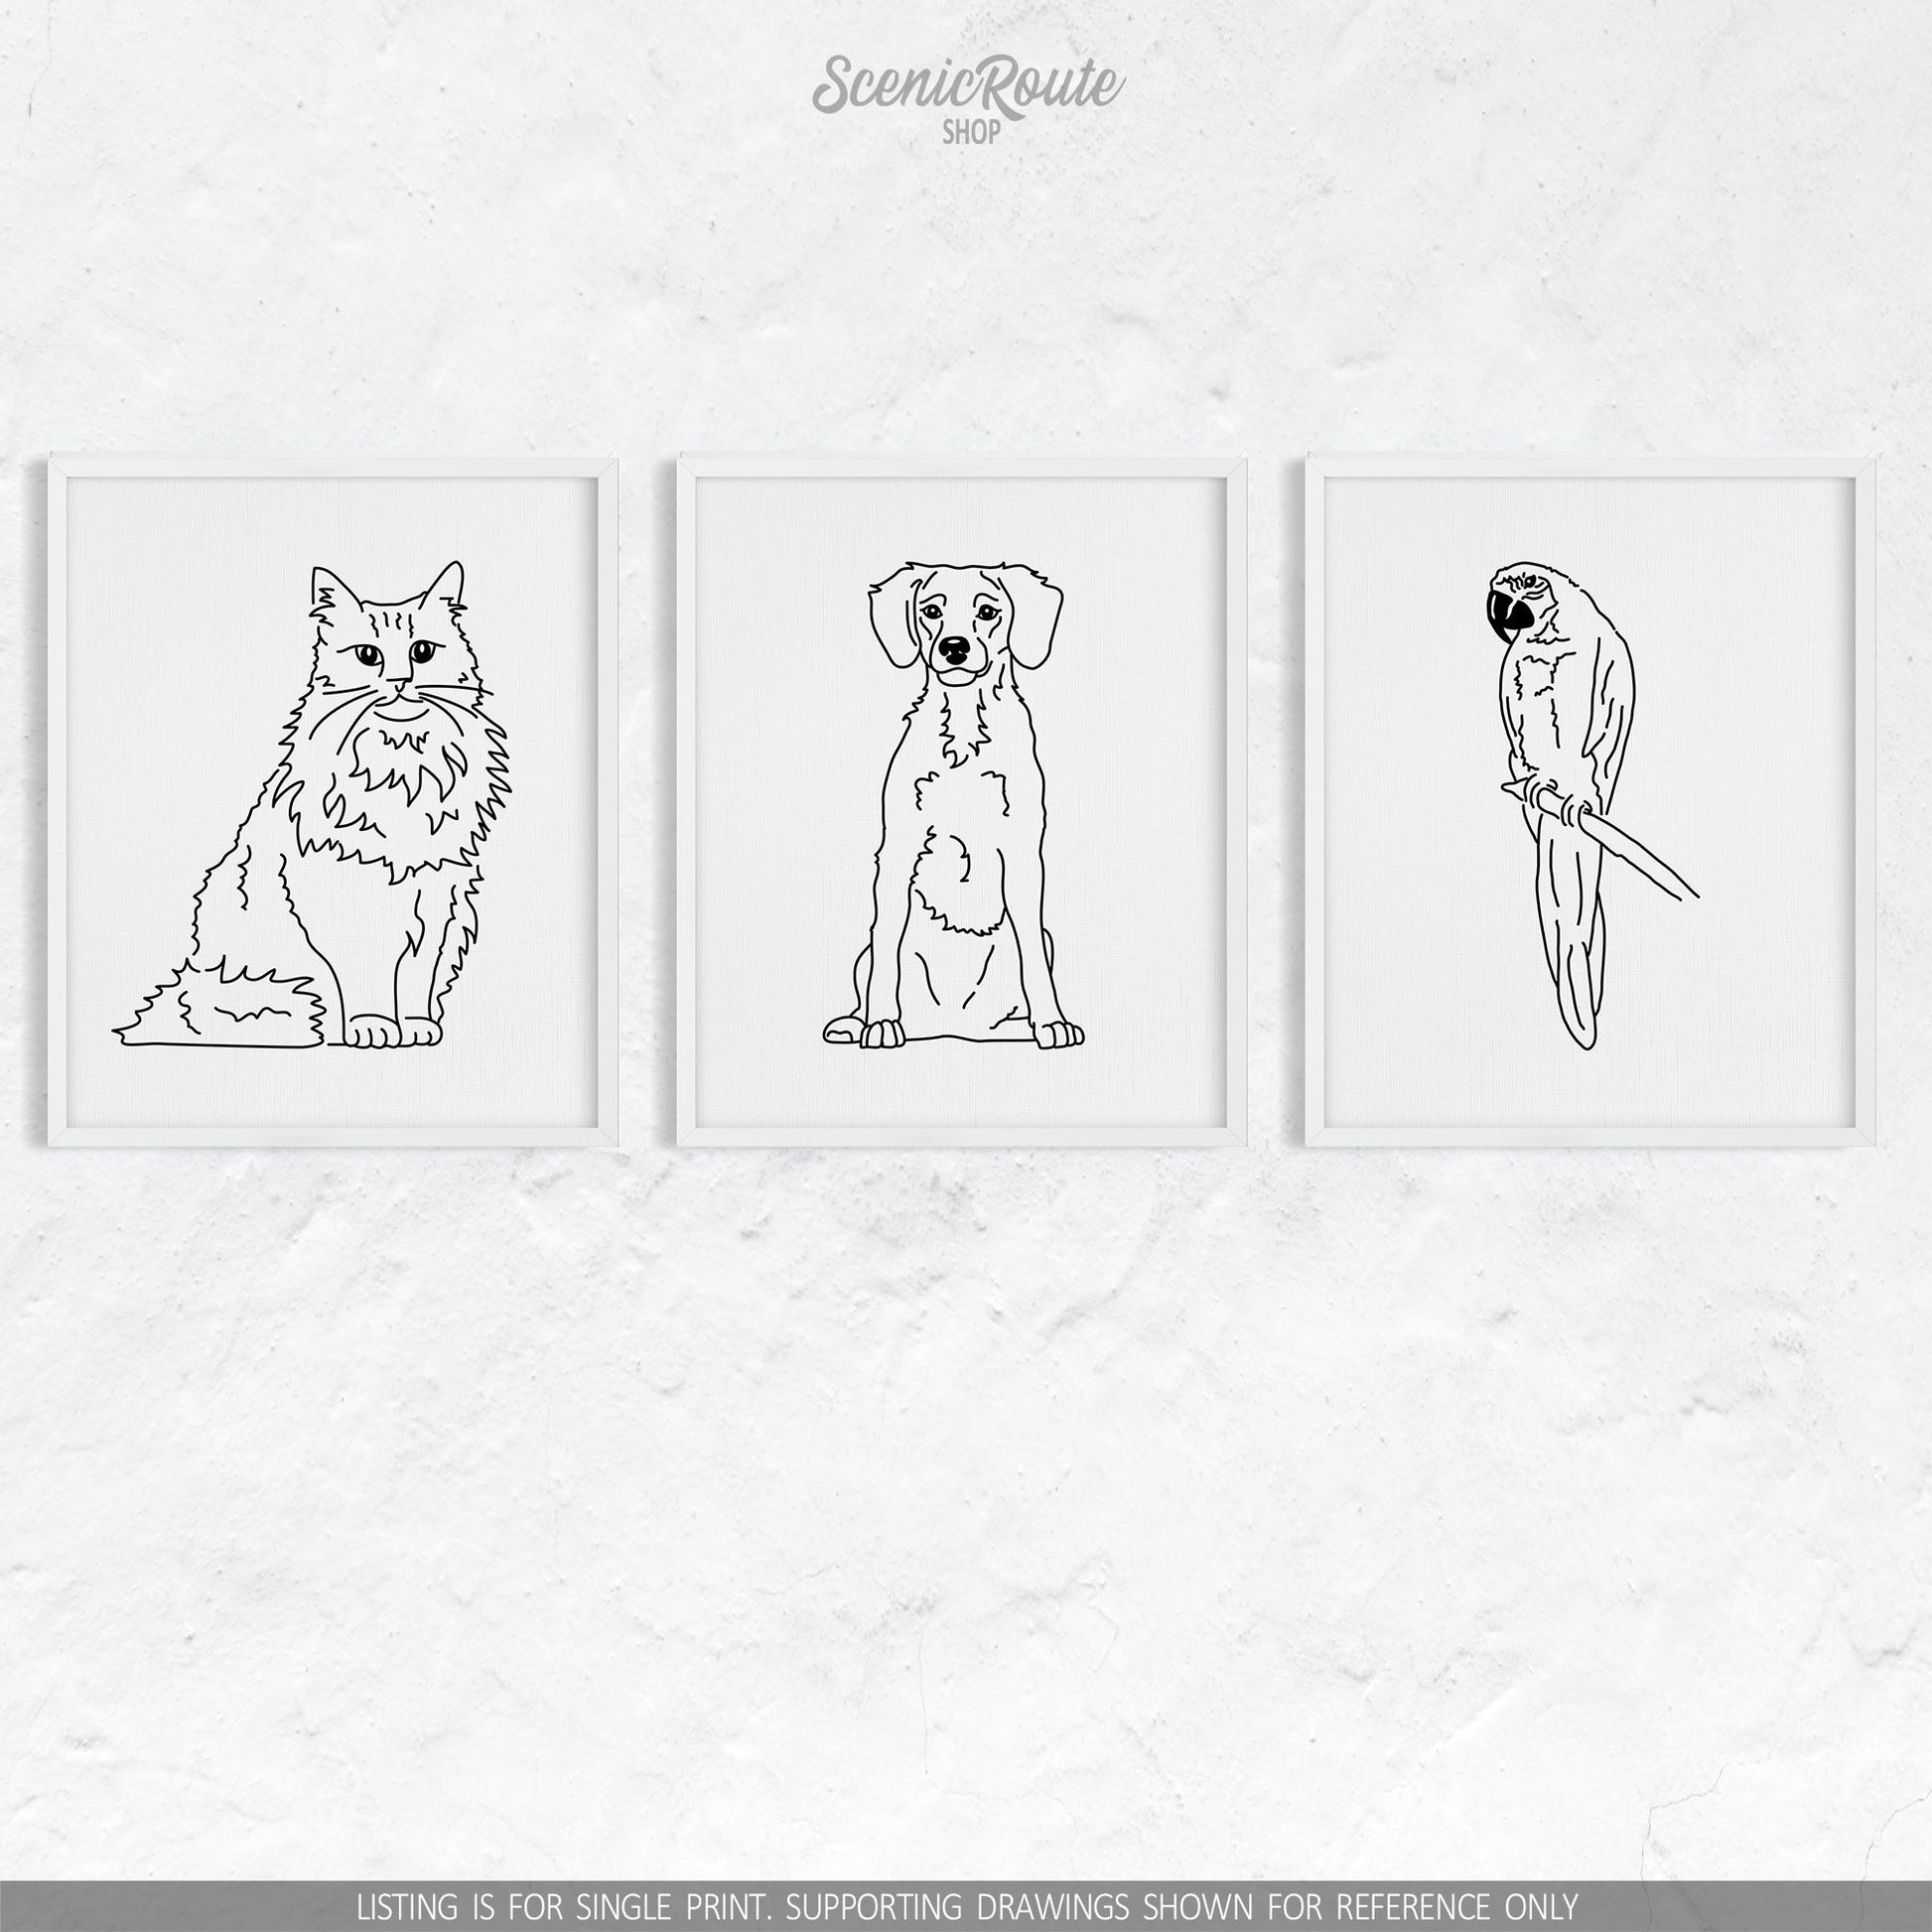 A group of three framed drawings on a white wall.  The line art drawings include a Norwegian Forest cat, a Brittany Spaniel dog, and a Parrot